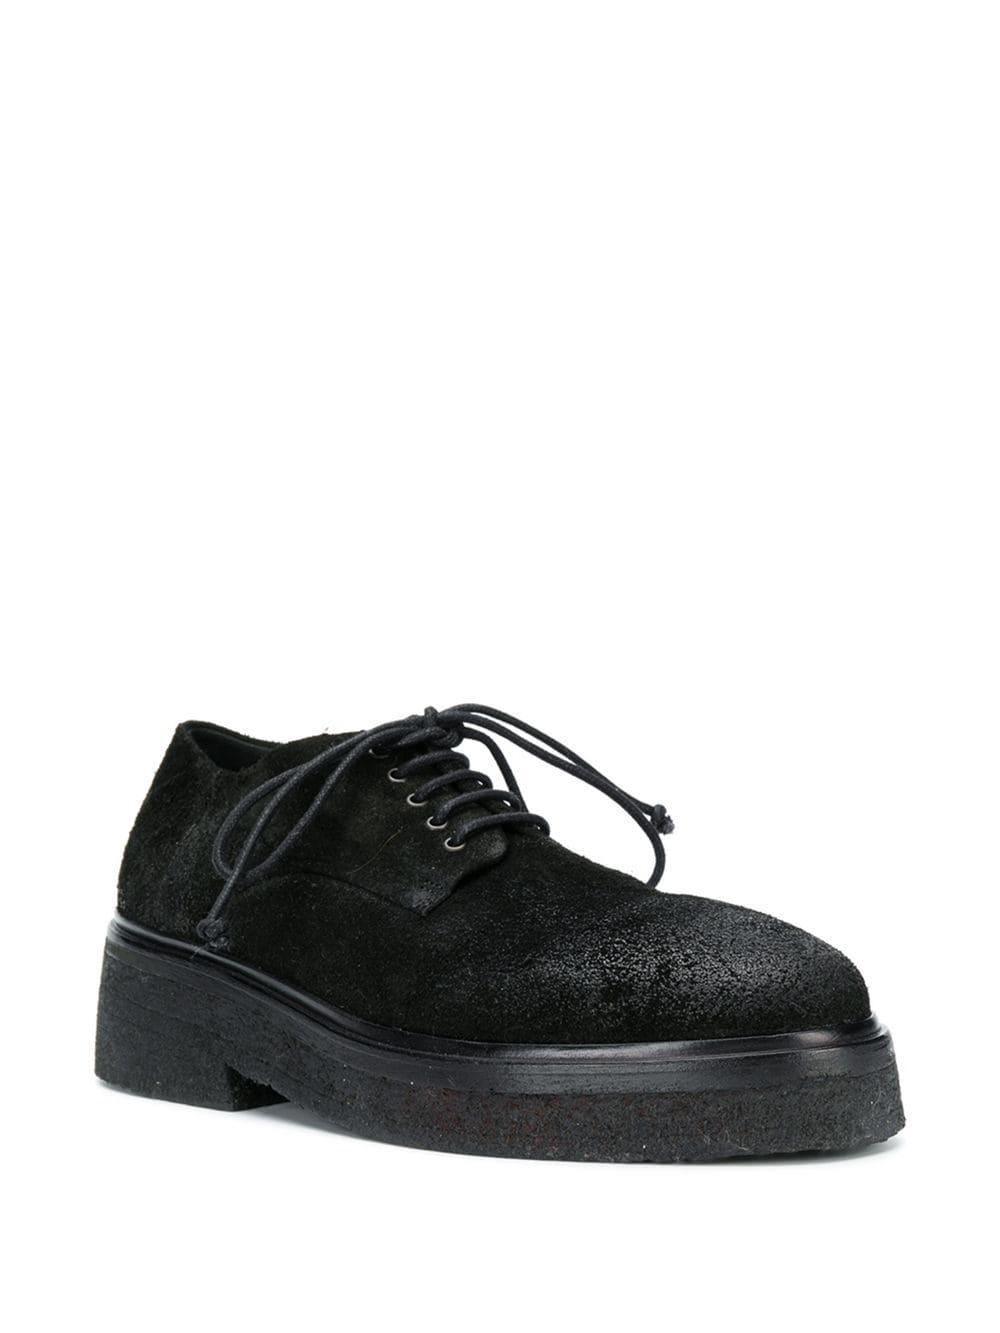 Lyst - Marsèll Chunky Sole Derby Shoes in Black for Men